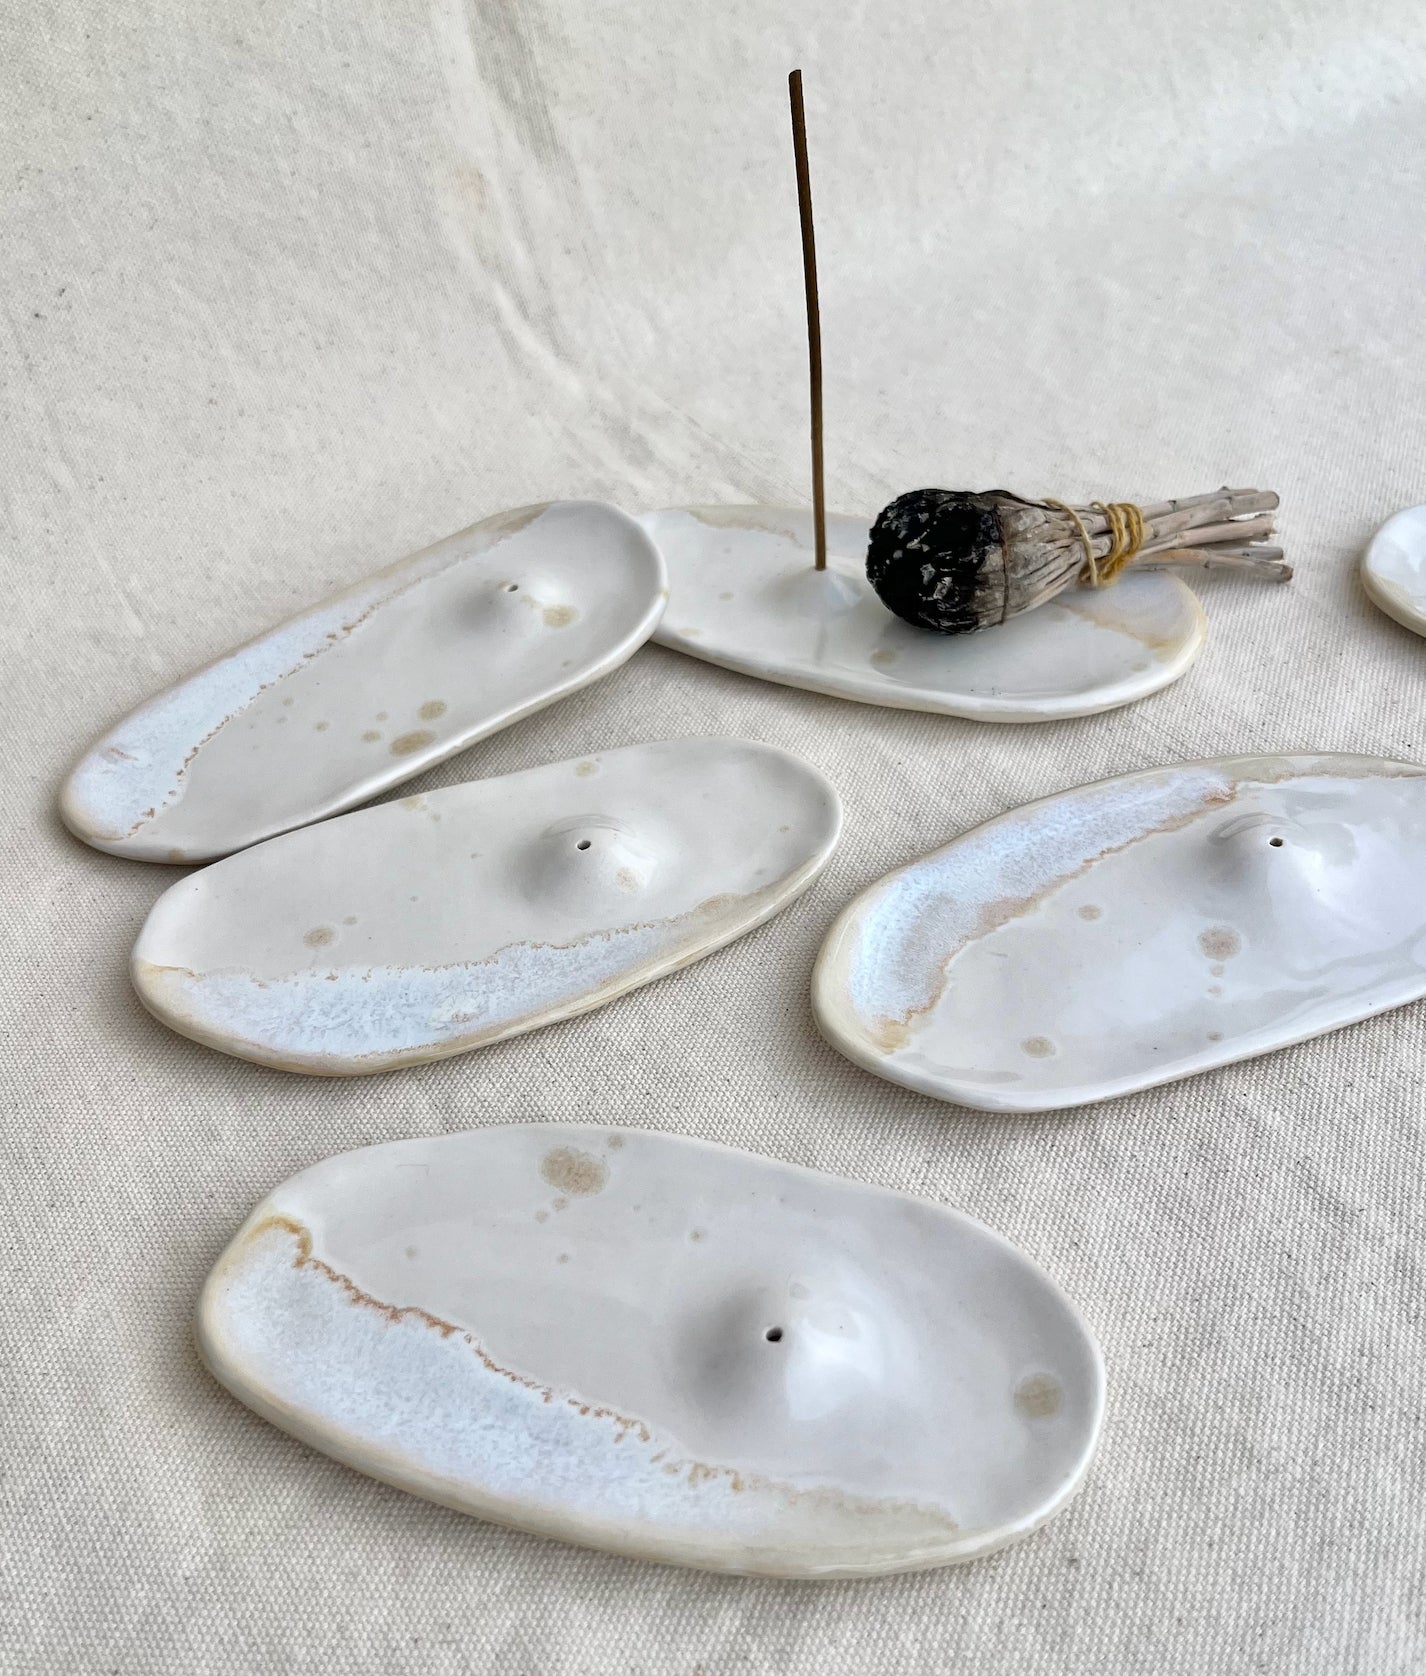 Neutrally glazed ceramic dish for your stick incense...or burn cone incense on the side. Hand built, glazed and fired in Slo, Ca. roaming barefoot ceramics